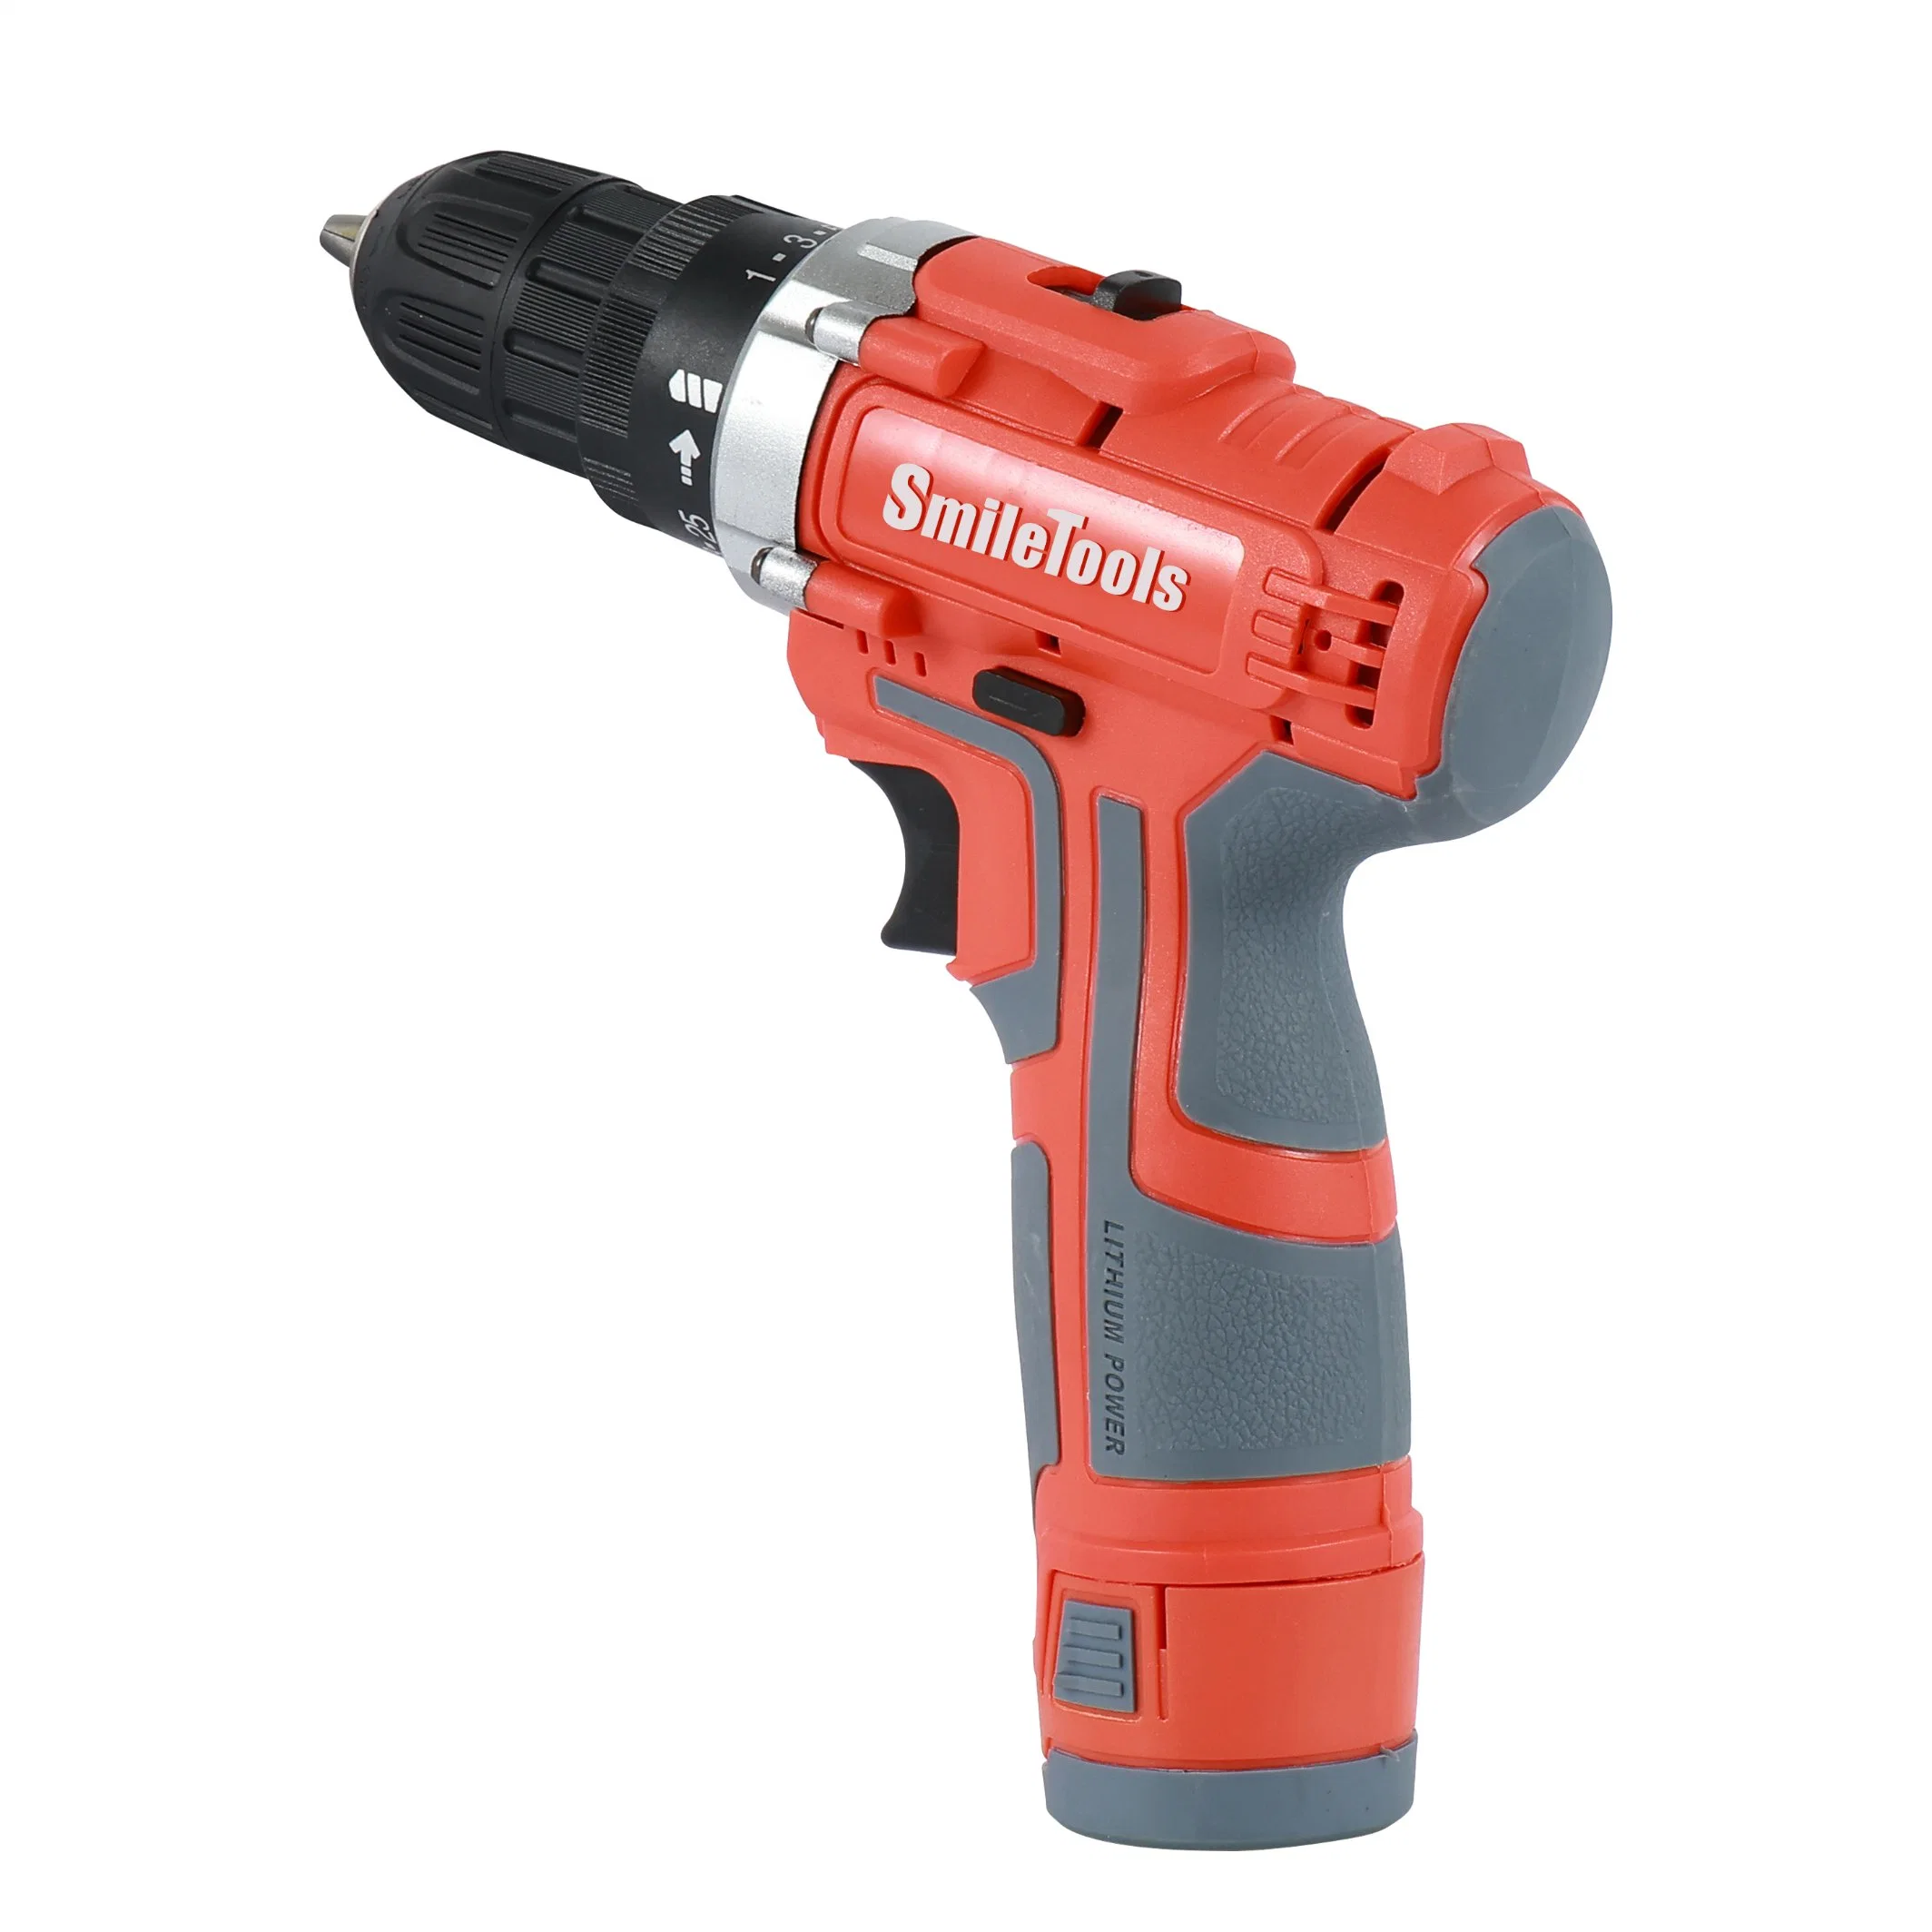 Best Selling Professional 21V 550W Electric Impact Drill Hand Impact Drill Household Power Tools